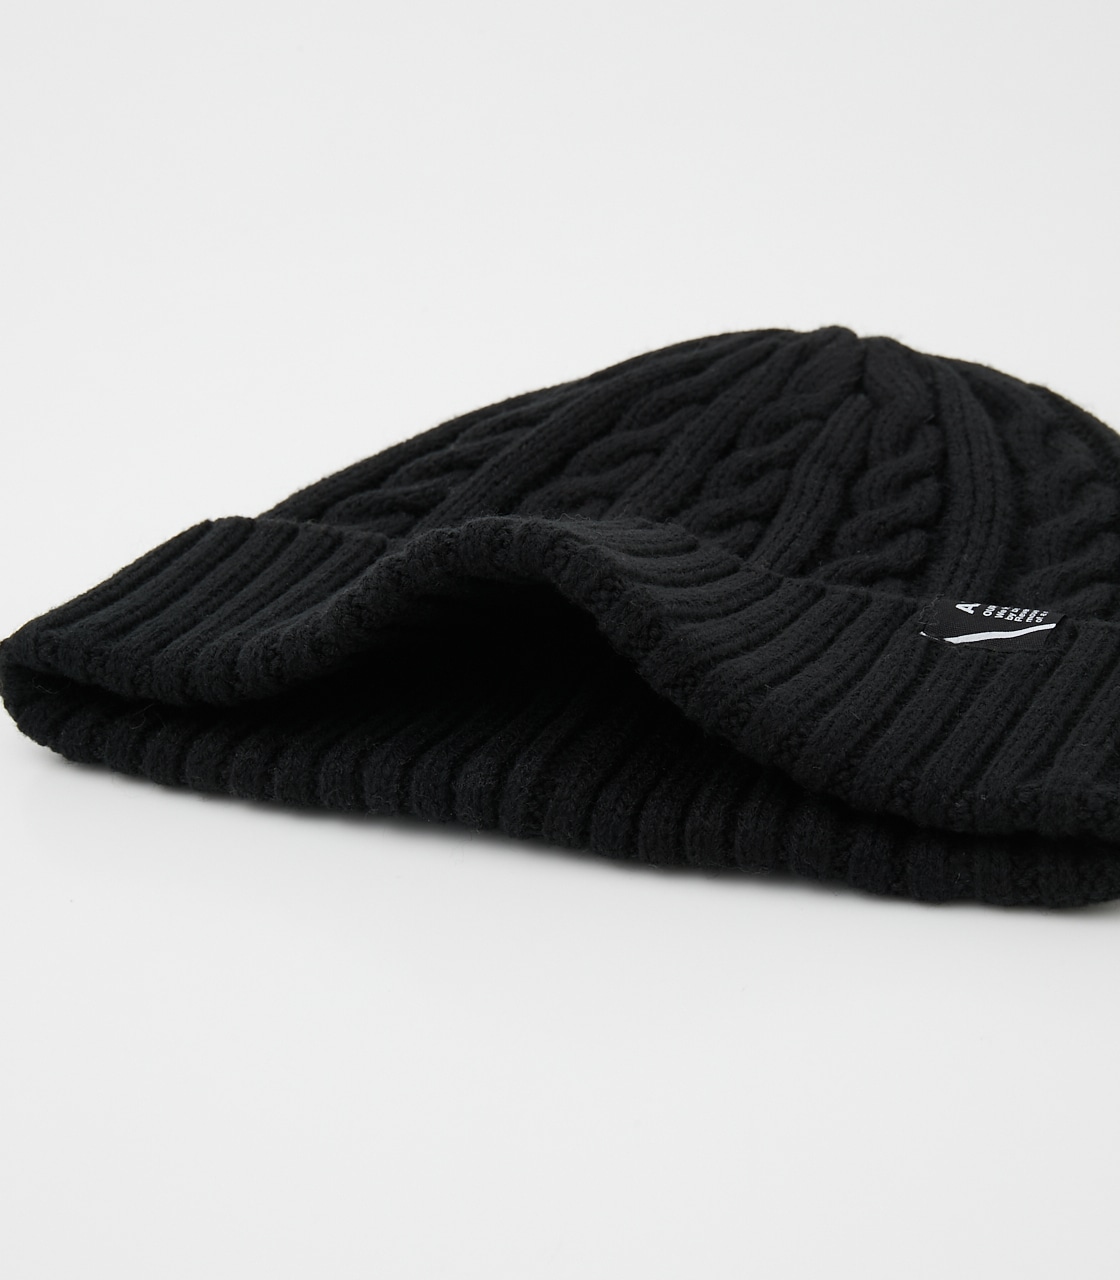 CABLE KNIT CAP/ケーブルニットキャップ 詳細画像 BLK 6